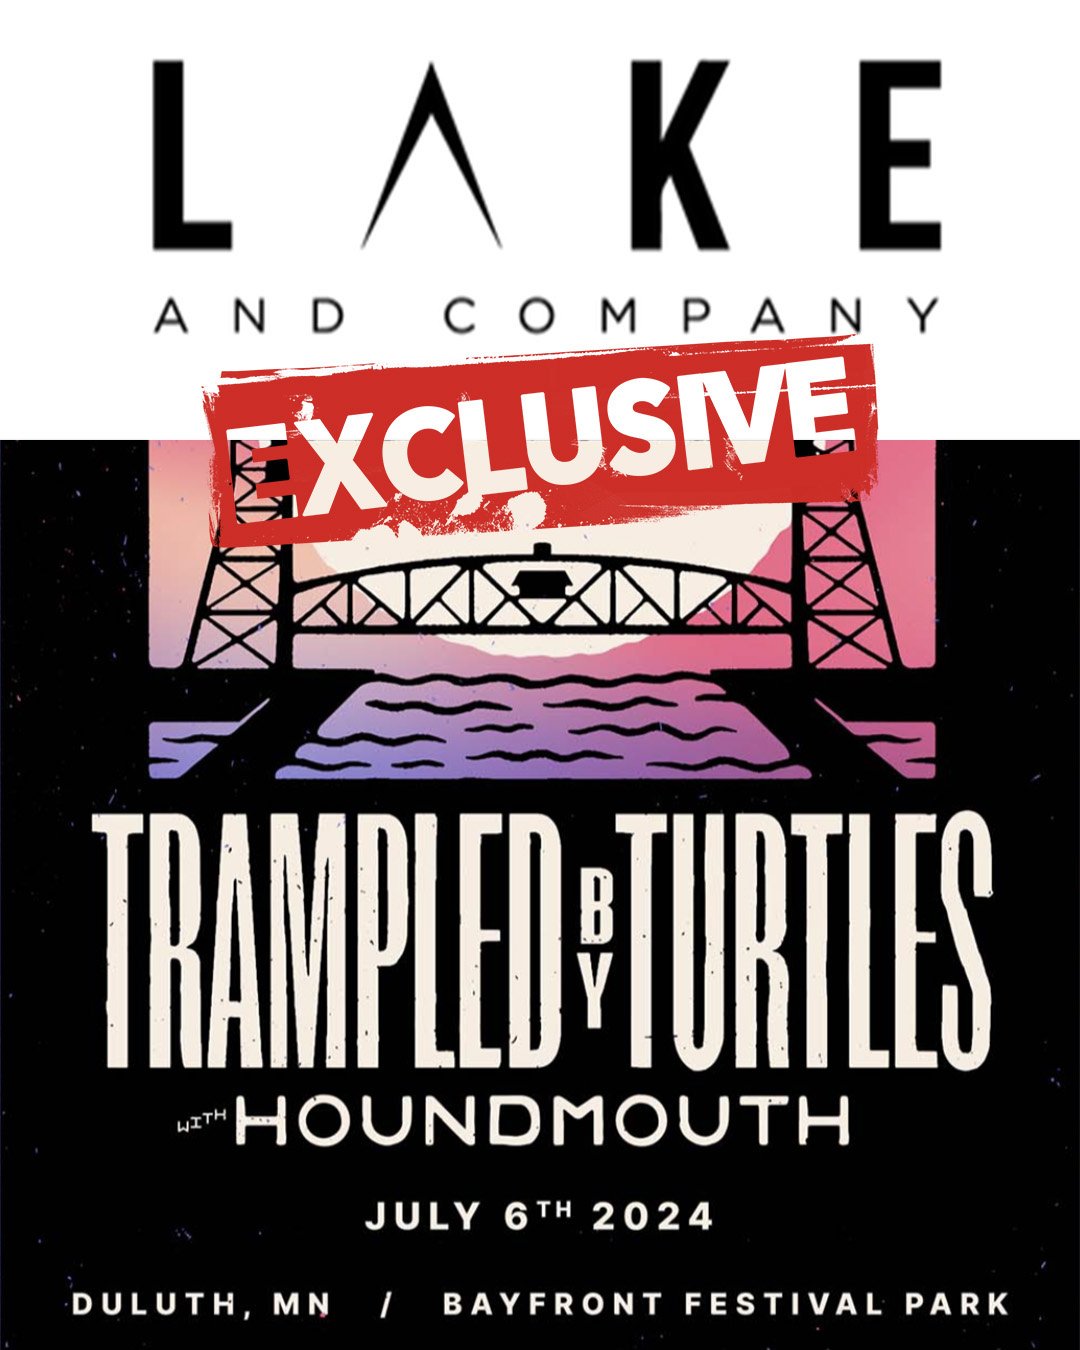 Lake + Company Exclusive story.

Buffalo Media Group and Lake + Company magazine will be covering Trampled by Turtles concert in Duluth this July. We are also putting together an amazing exclusive story with lead singer Dave Simonett...stay tuned!!!